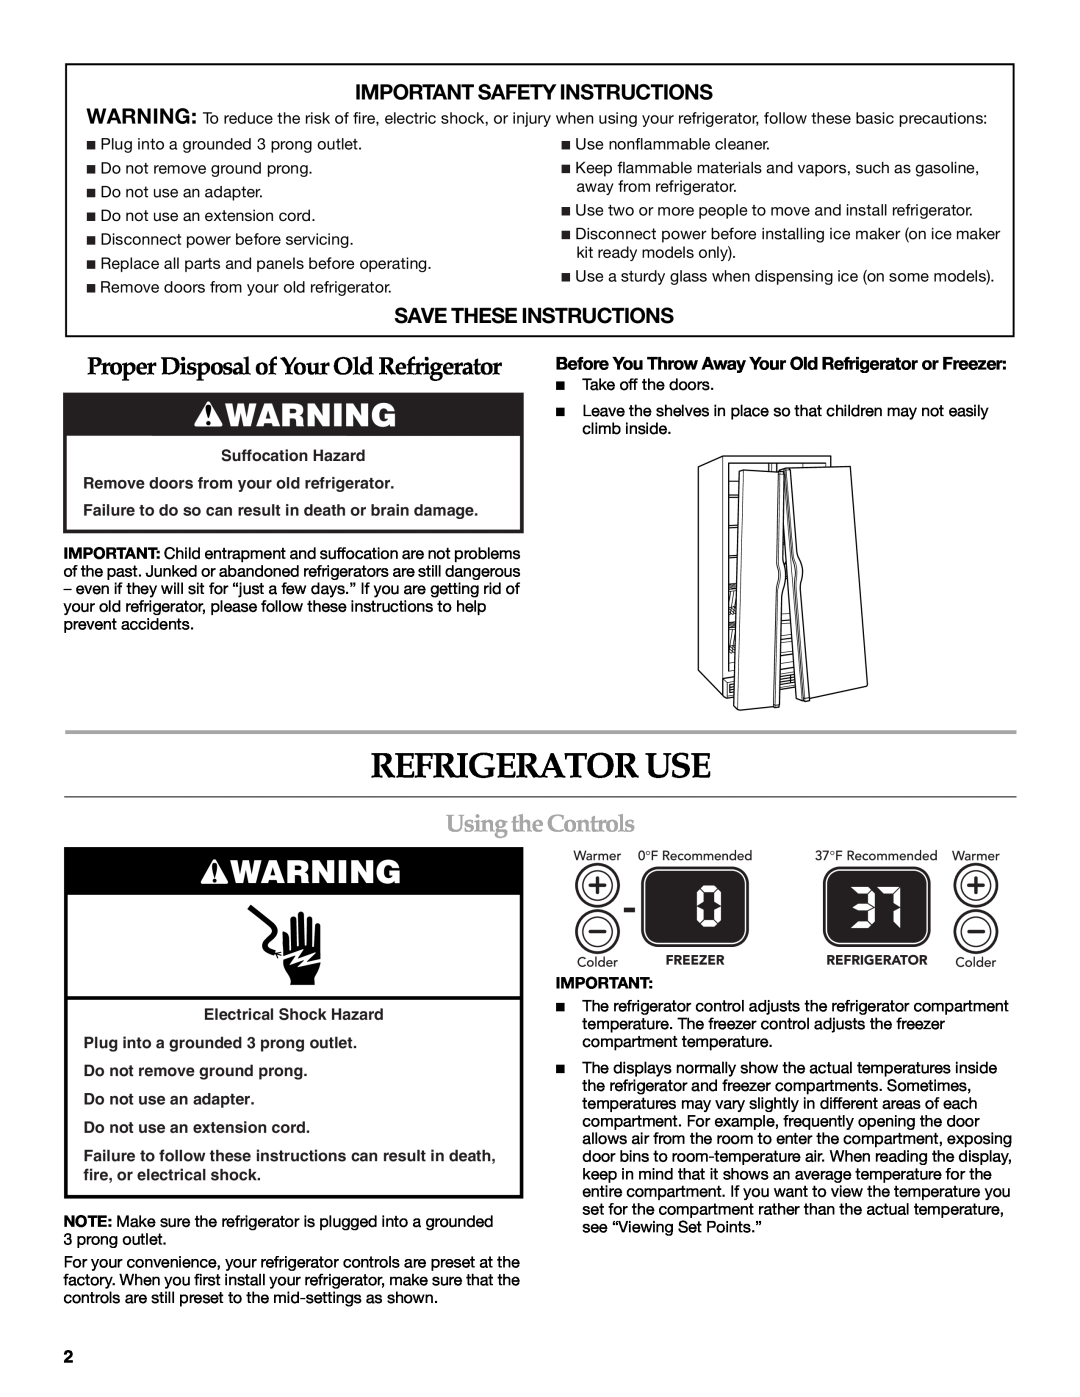 KitchenAid W10162434A warranty Refrigerator Use, Proper Disposal of Your Old Refrigerator, Using the Controls 